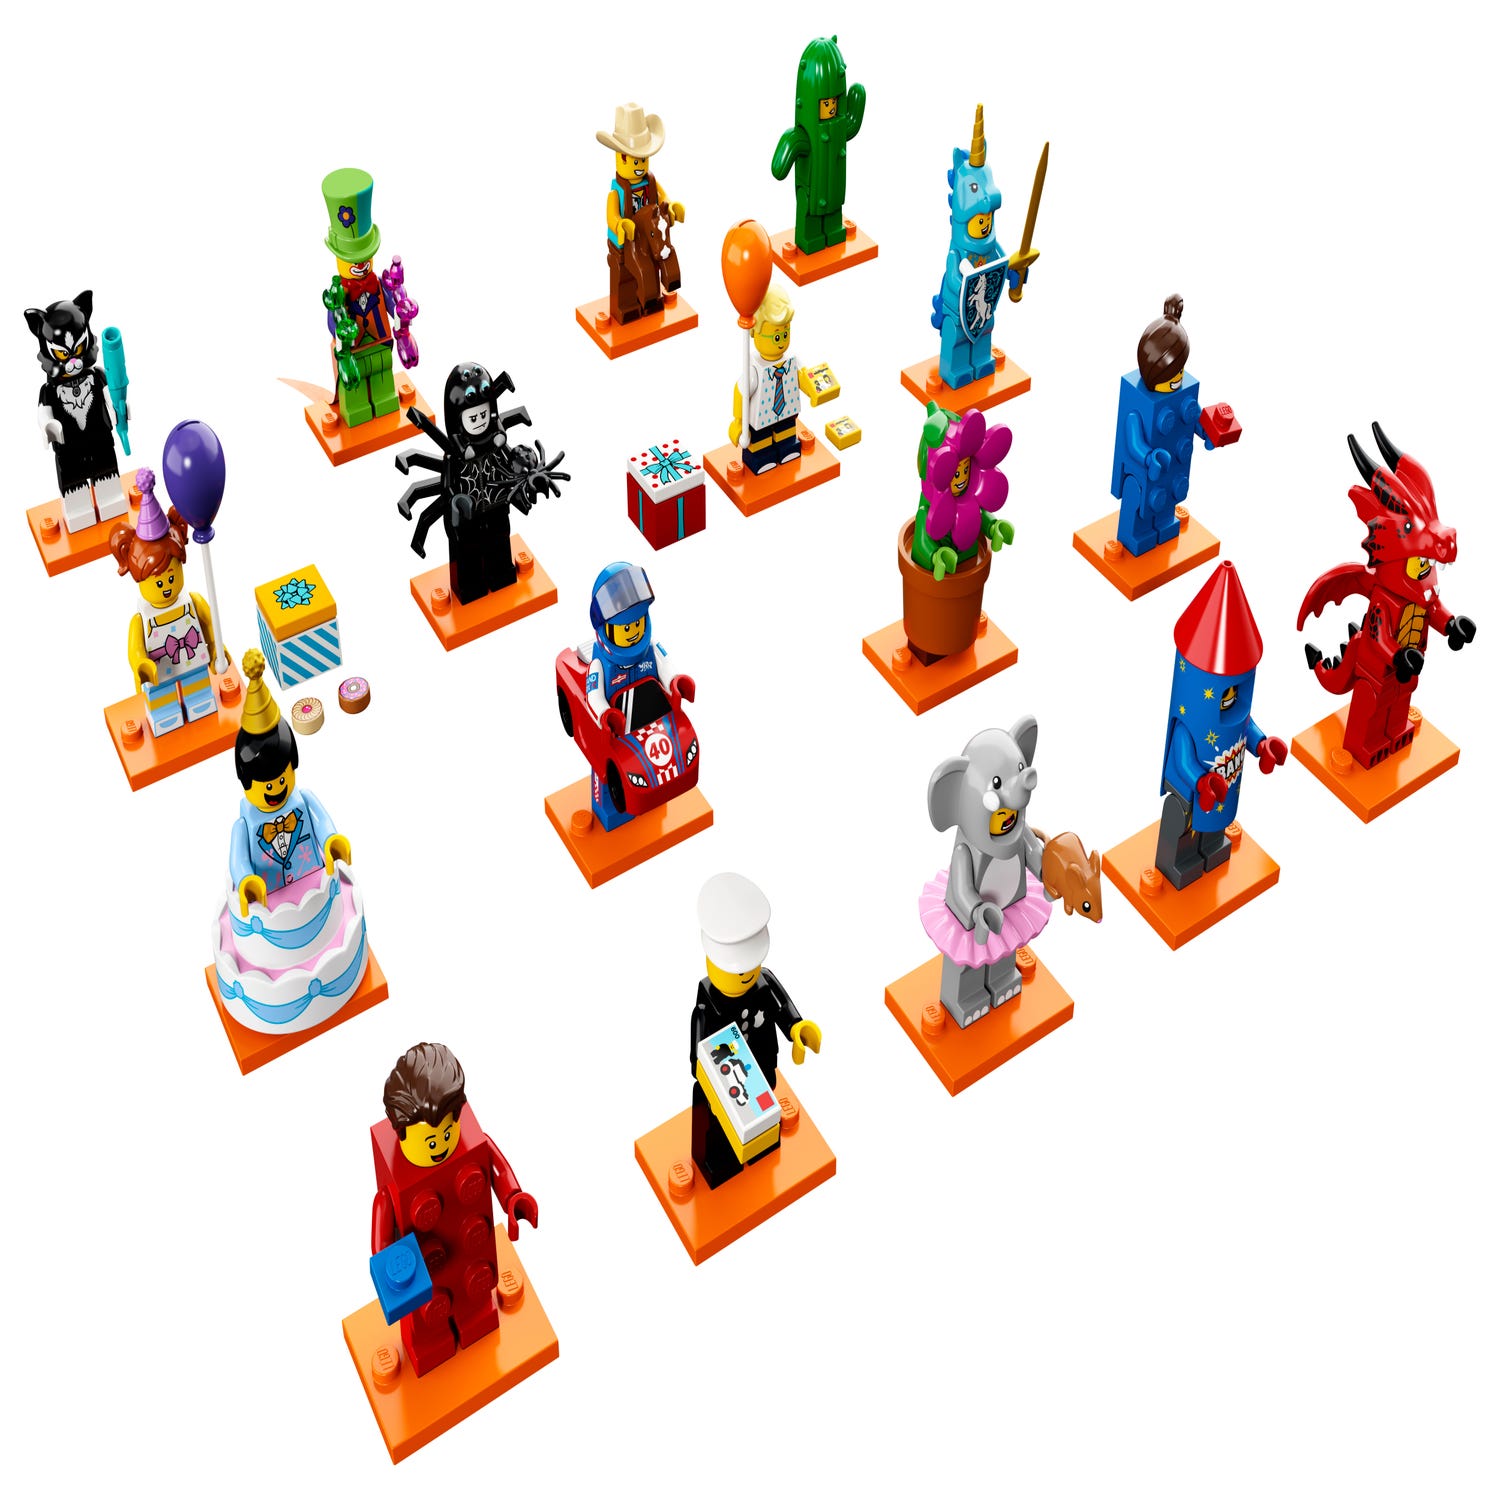 18: 71021 | Minifigures | Buy at Official LEGO® Shop US